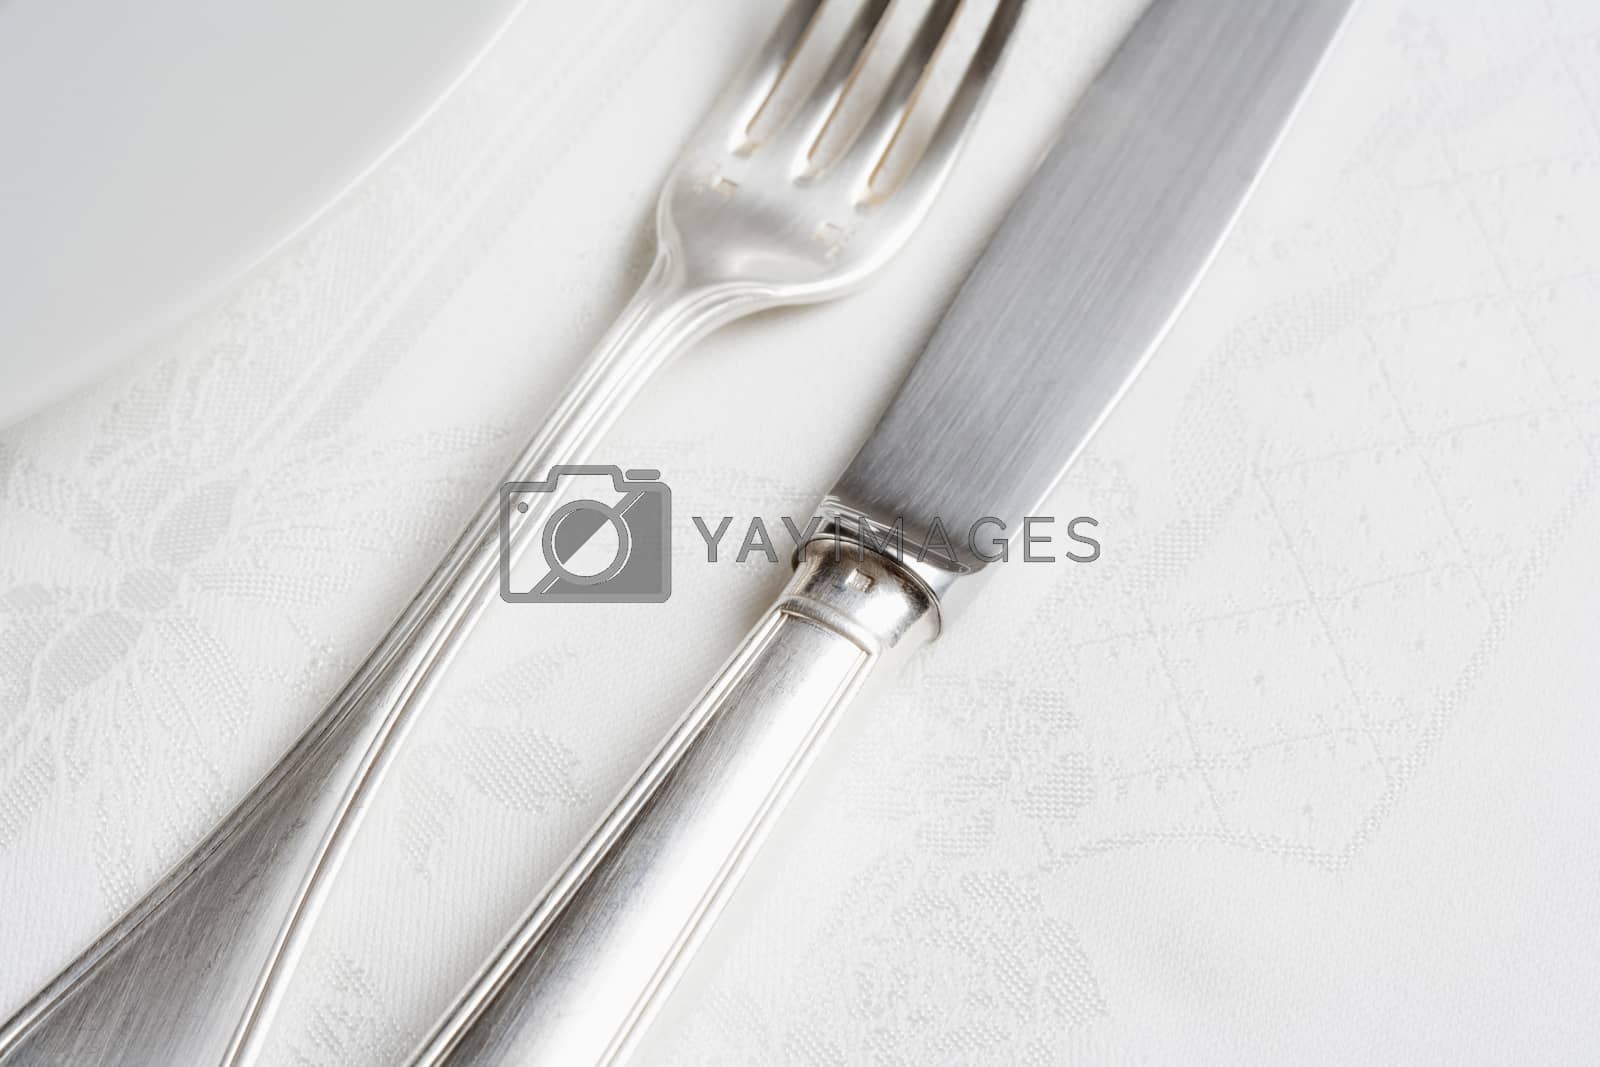 Royalty free image of silverware by courtyardpix